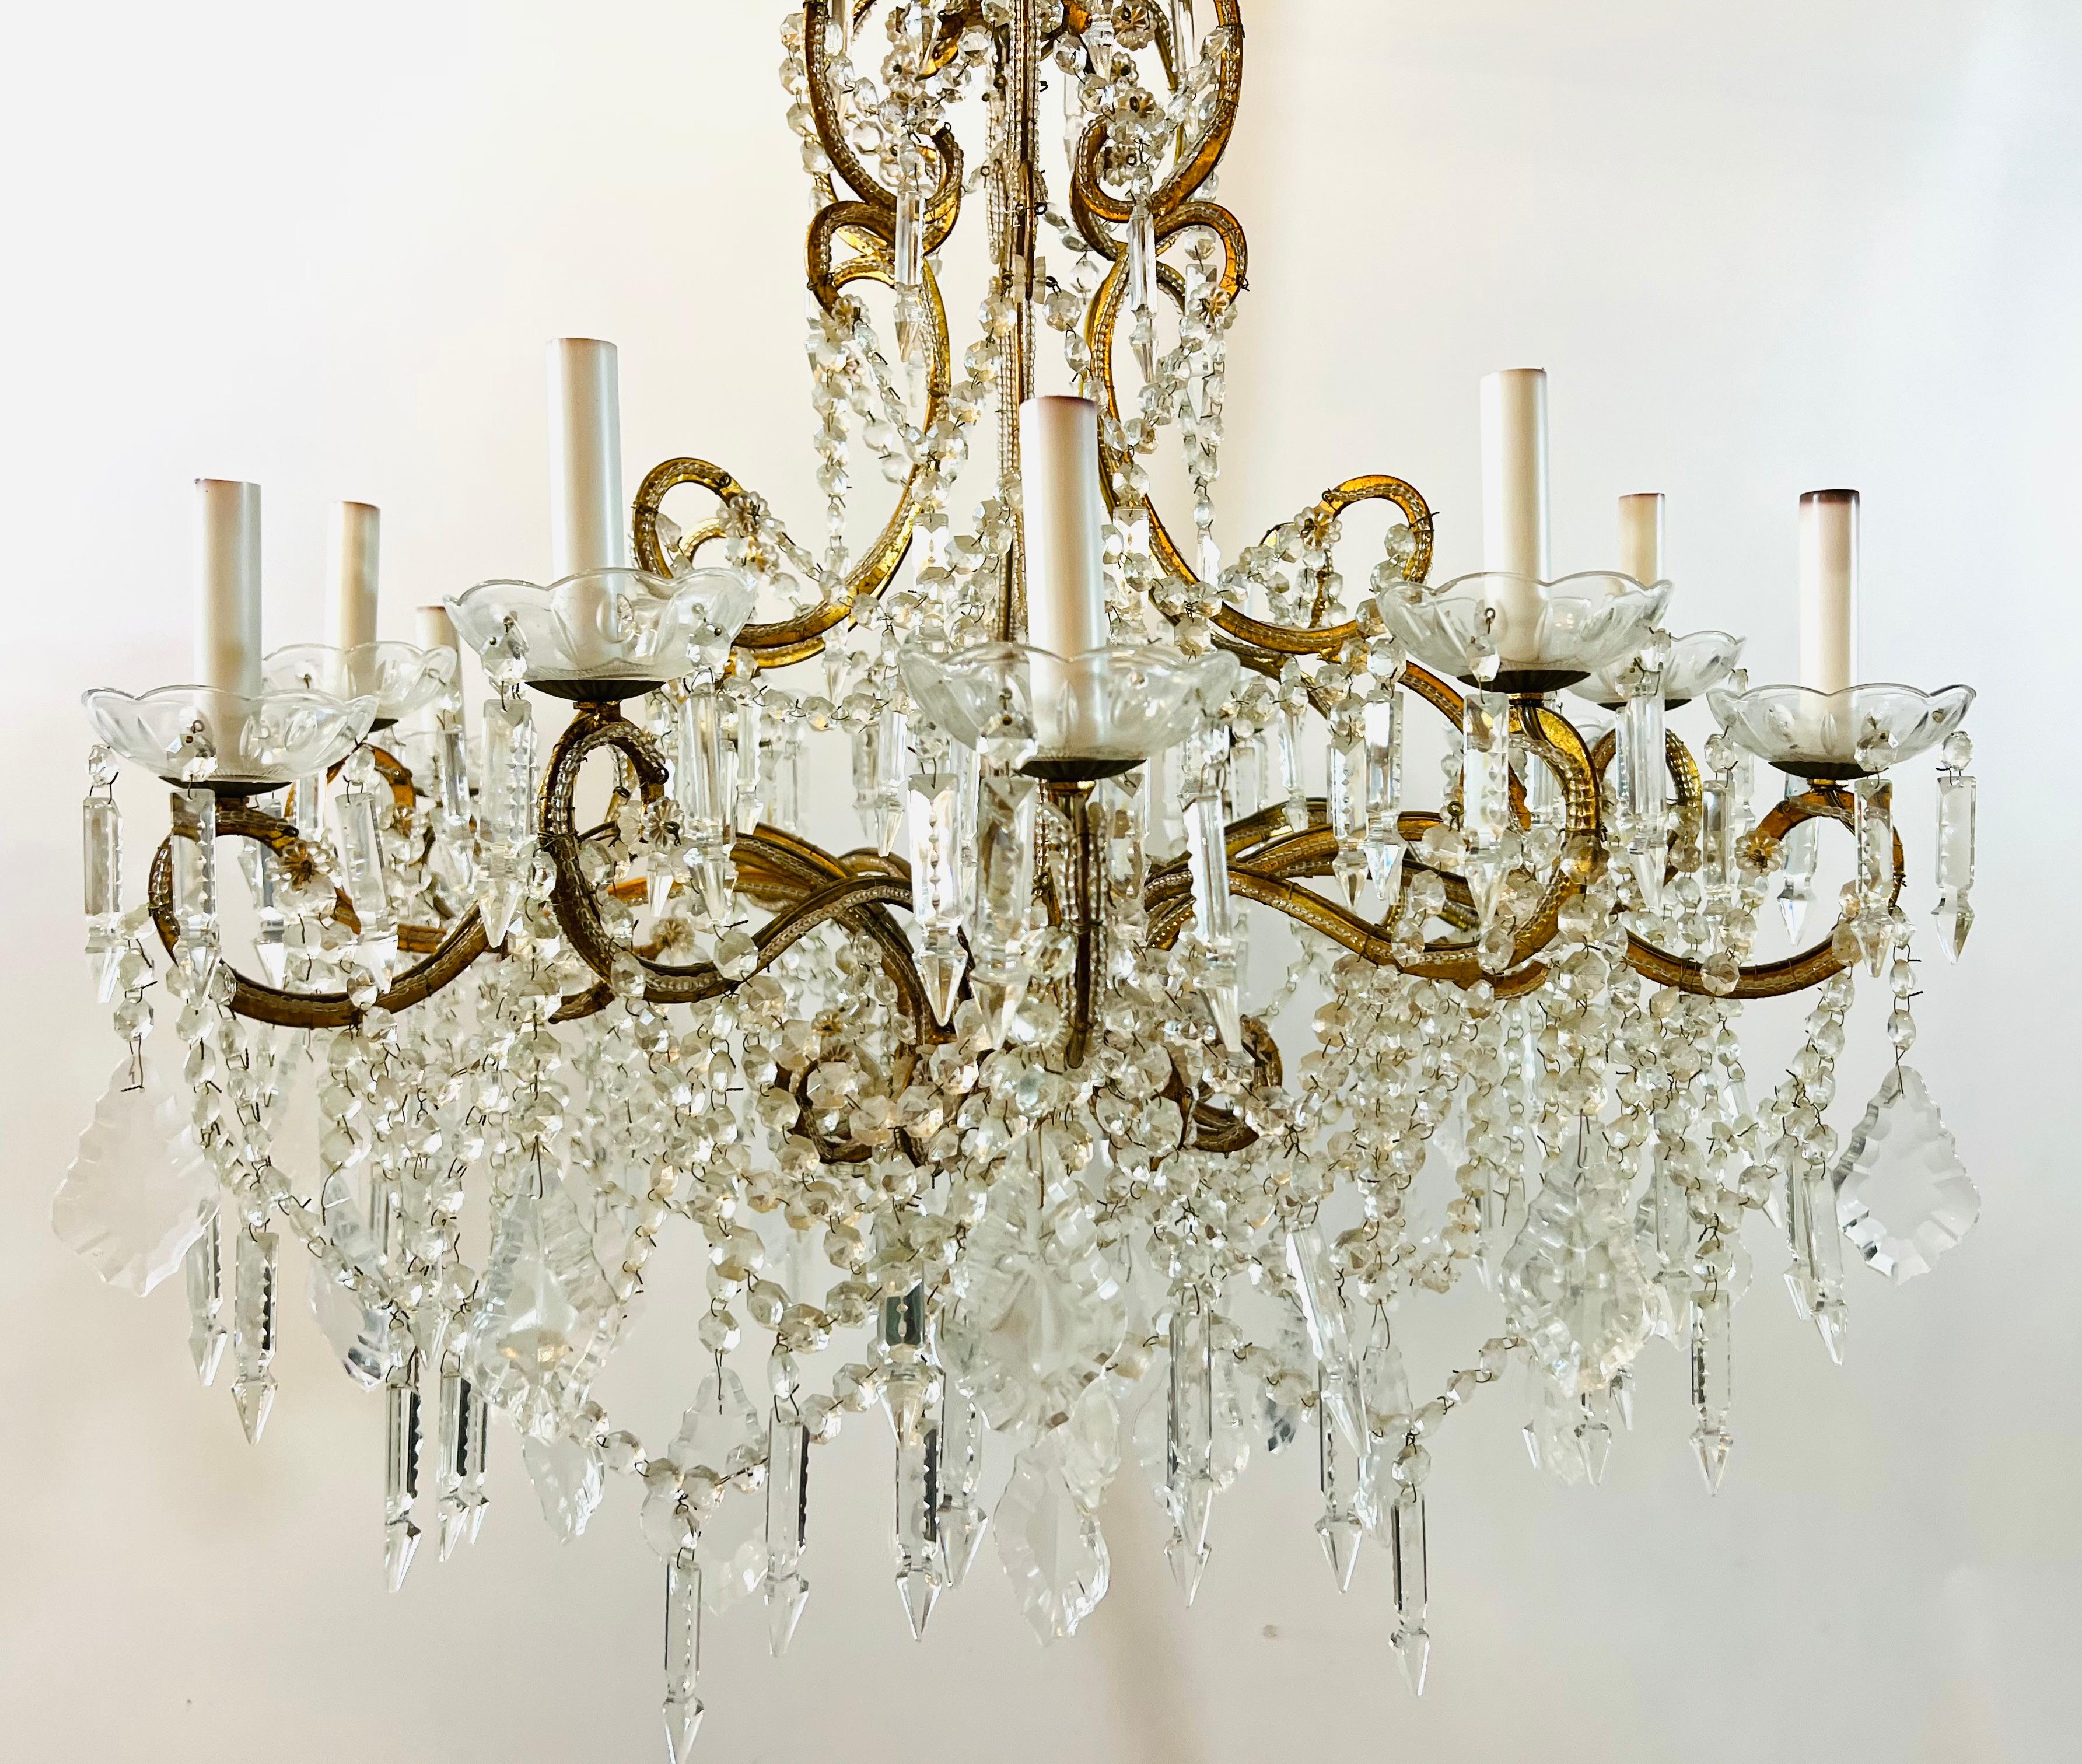 An elegant French Marie Therese Hollywood Regency style cut crystals 
chandelier having 12 arms. The multi-light chandelier is embellished with scrolls and gilt brass arms decorated with beads and French style pendaloques, obelisks crystals and